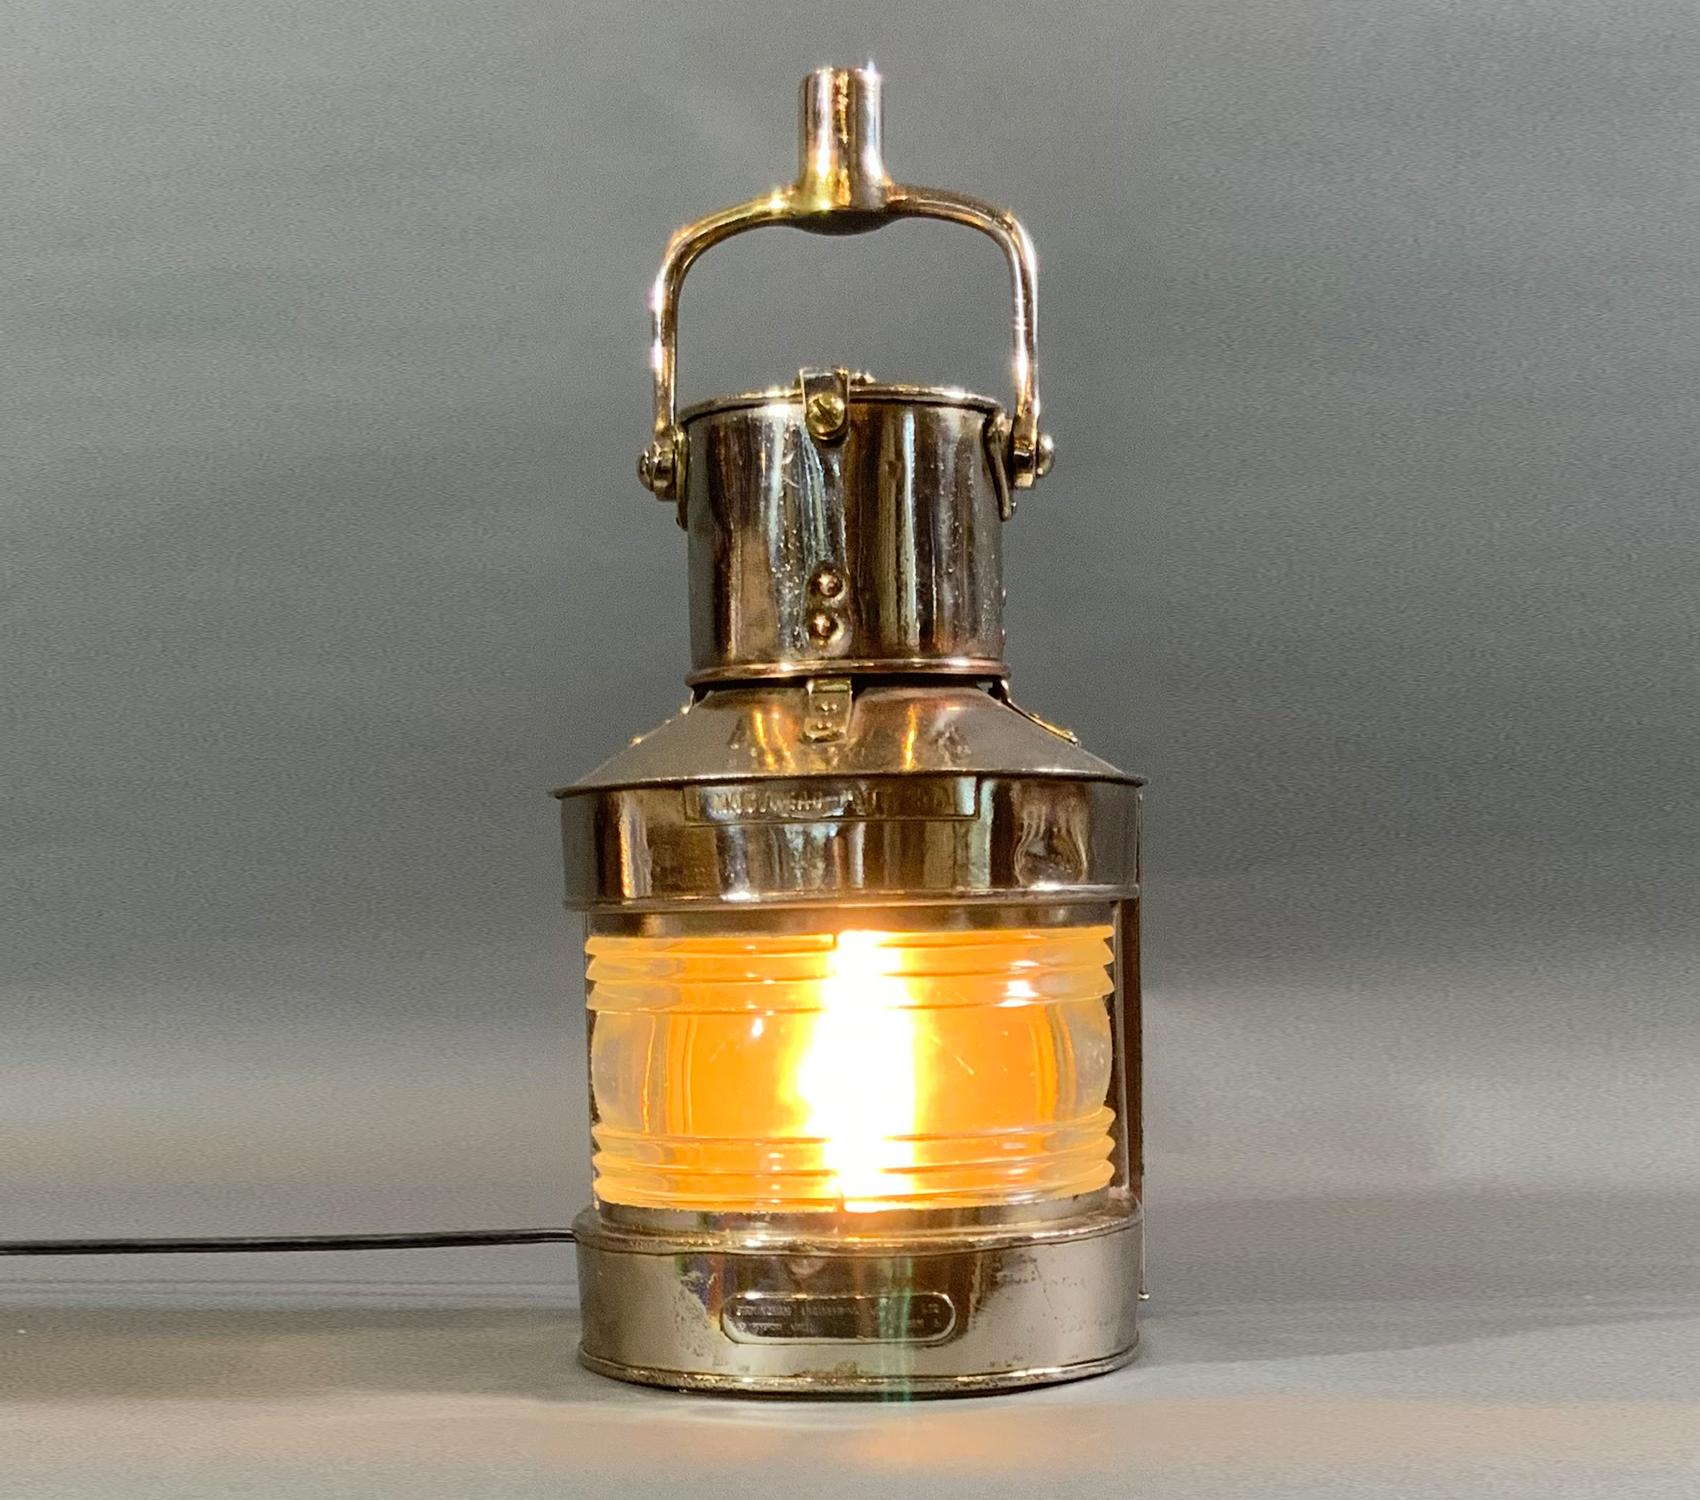 Polished steel ships masthead lantern by English maker. Fitted with a Fresnel glass lens. Lantern is wired. Vented top and hoisting handle.

Weight: 8 LBS
Overall Dimensions: 12” H x 8” L x 8” D
Made: England
Material: Steel
Date: Circa 1950.